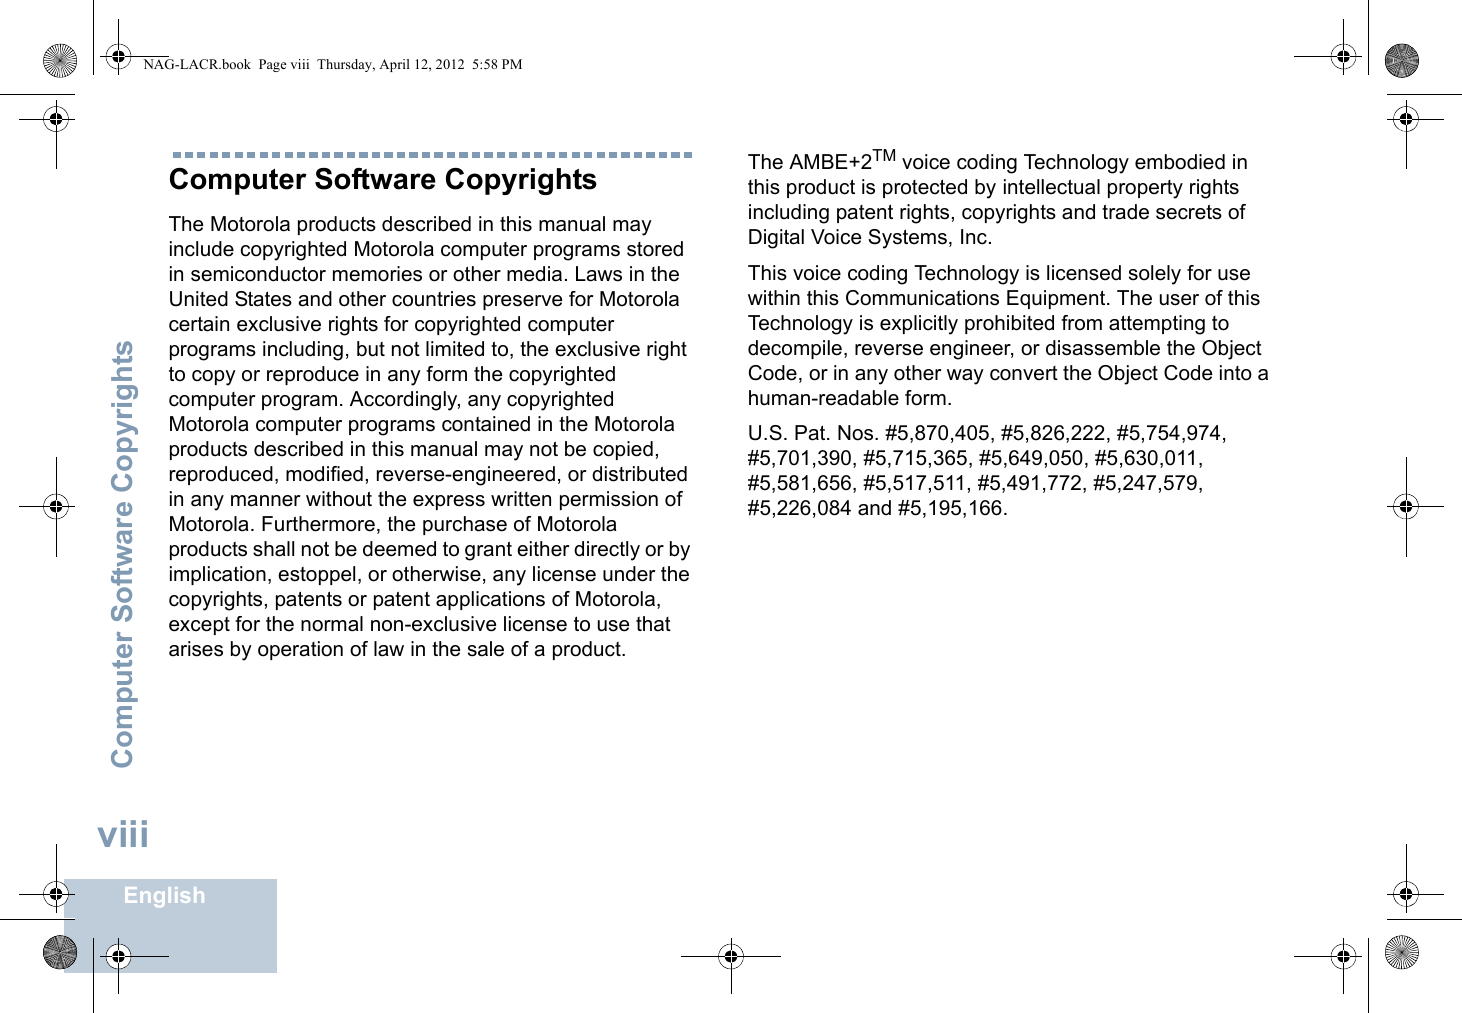 Computer Software CopyrightsEnglishviiiComputer Software CopyrightsThe Motorola products described in this manual may include copyrighted Motorola computer programs stored in semiconductor memories or other media. Laws in the United States and other countries preserve for Motorola certain exclusive rights for copyrighted computer programs including, but not limited to, the exclusive right to copy or reproduce in any form the copyrighted computer program. Accordingly, any copyrighted Motorola computer programs contained in the Motorola products described in this manual may not be copied, reproduced, modified, reverse-engineered, or distributed in any manner without the express written permission of Motorola. Furthermore, the purchase of Motorola products shall not be deemed to grant either directly or by implication, estoppel, or otherwise, any license under the copyrights, patents or patent applications of Motorola, except for the normal non-exclusive license to use that arises by operation of law in the sale of a product.The AMBE+2TM voice coding Technology embodied in this product is protected by intellectual property rights including patent rights, copyrights and trade secrets of Digital Voice Systems, Inc. This voice coding Technology is licensed solely for use within this Communications Equipment. The user of this Technology is explicitly prohibited from attempting to decompile, reverse engineer, or disassemble the Object Code, or in any other way convert the Object Code into a human-readable form. U.S. Pat. Nos. #5,870,405, #5,826,222, #5,754,974, #5,701,390, #5,715,365, #5,649,050, #5,630,011, #5,581,656, #5,517,511, #5,491,772, #5,247,579, #5,226,084 and #5,195,166.NAG-LACR.book  Page viii  Thursday, April 12, 2012  5:58 PM